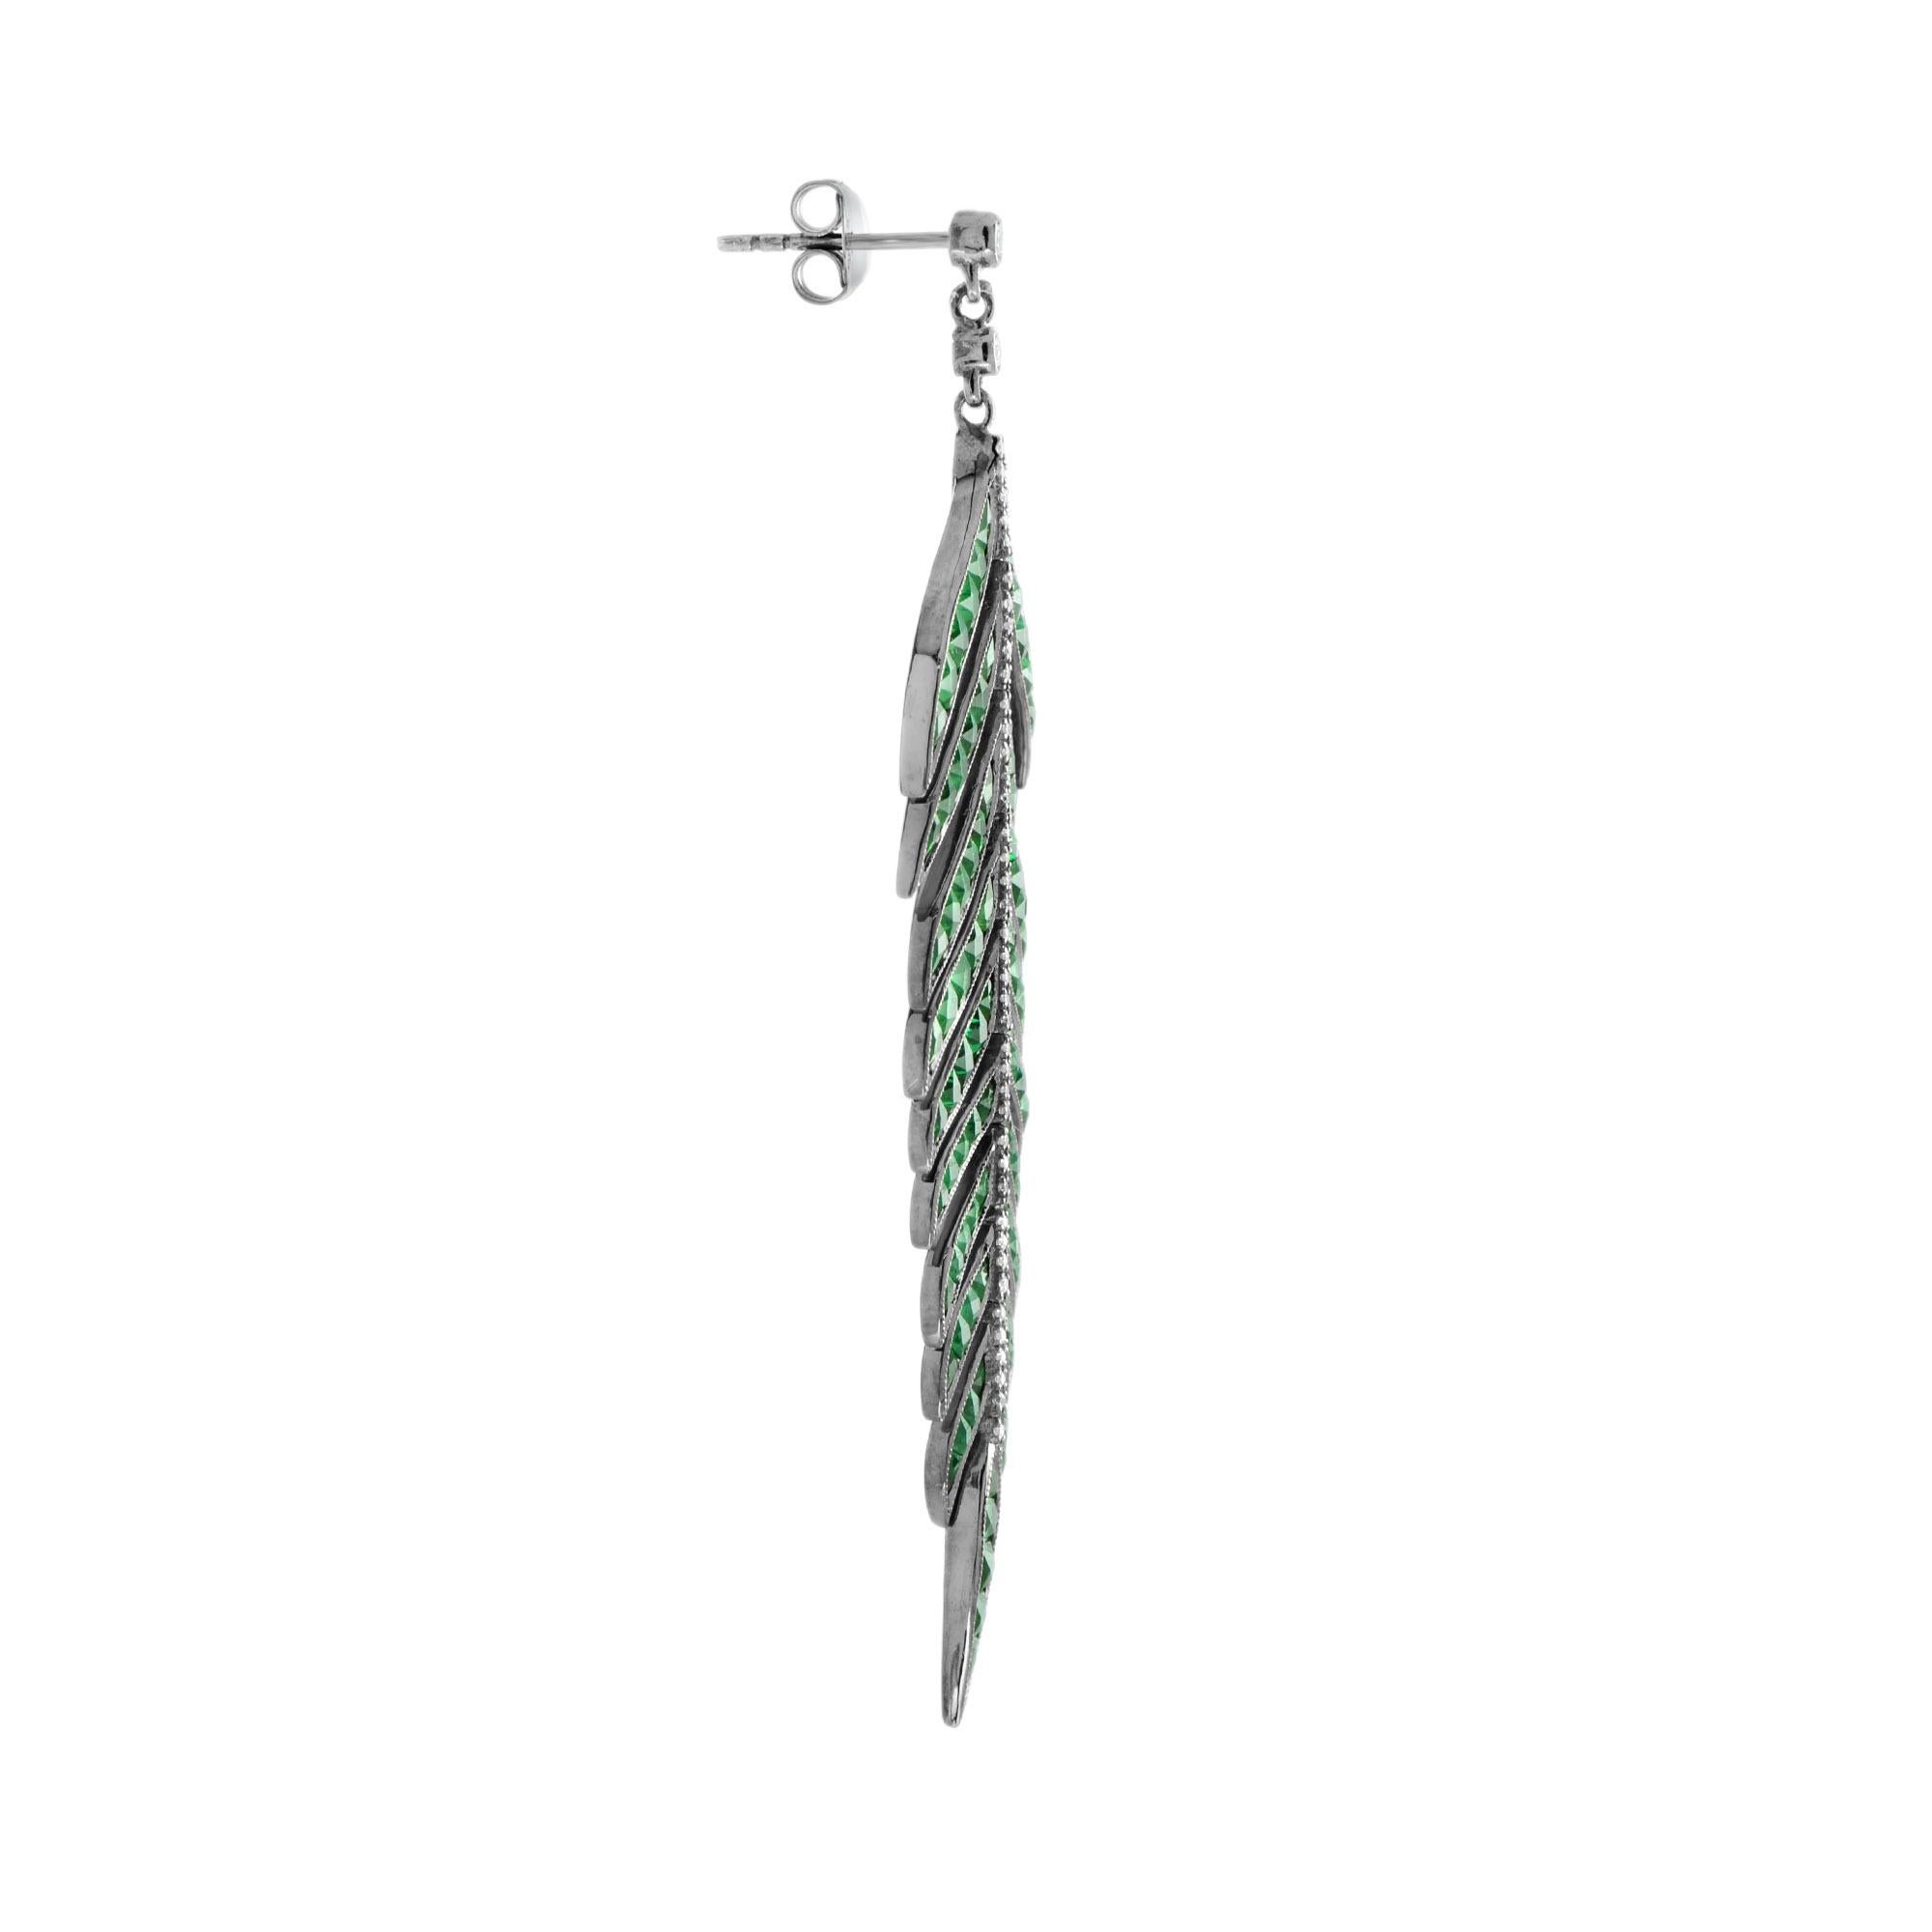 Dress up her ears in nature inspired elegance with these sophisticated green emerald and diamond leaf drop earrings. Crafted in black rhodium plating 18k white gold, each earring showcases an inspiring open design shimmering with emeralds total 15.1